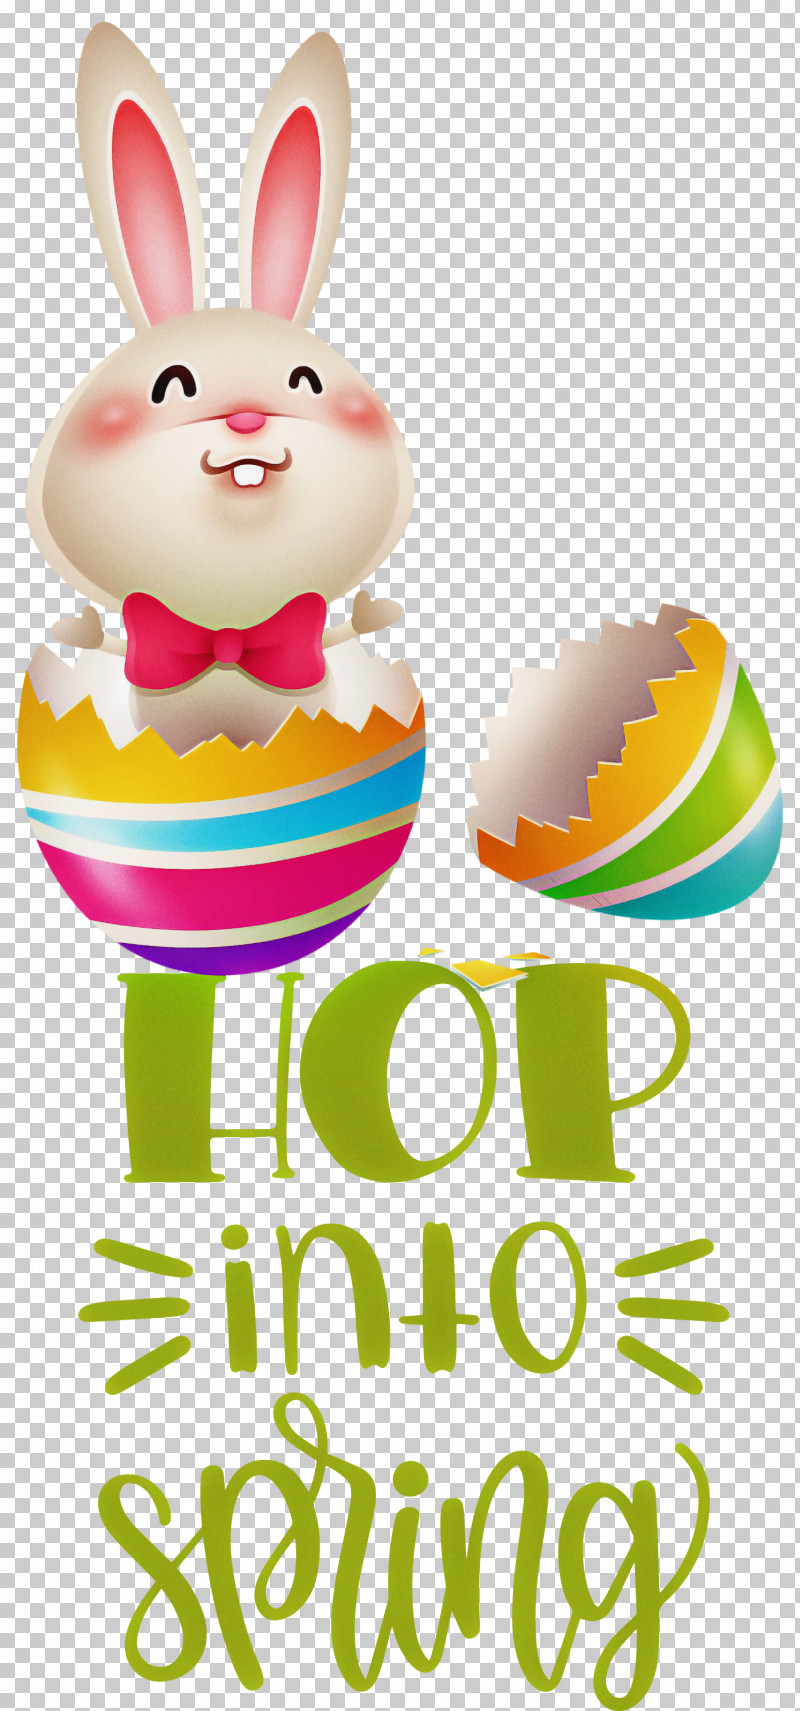 Easter Day Easter Eggs Vector Drawing Stock Vector (Royalty Free) 264940016  | Shutterstock